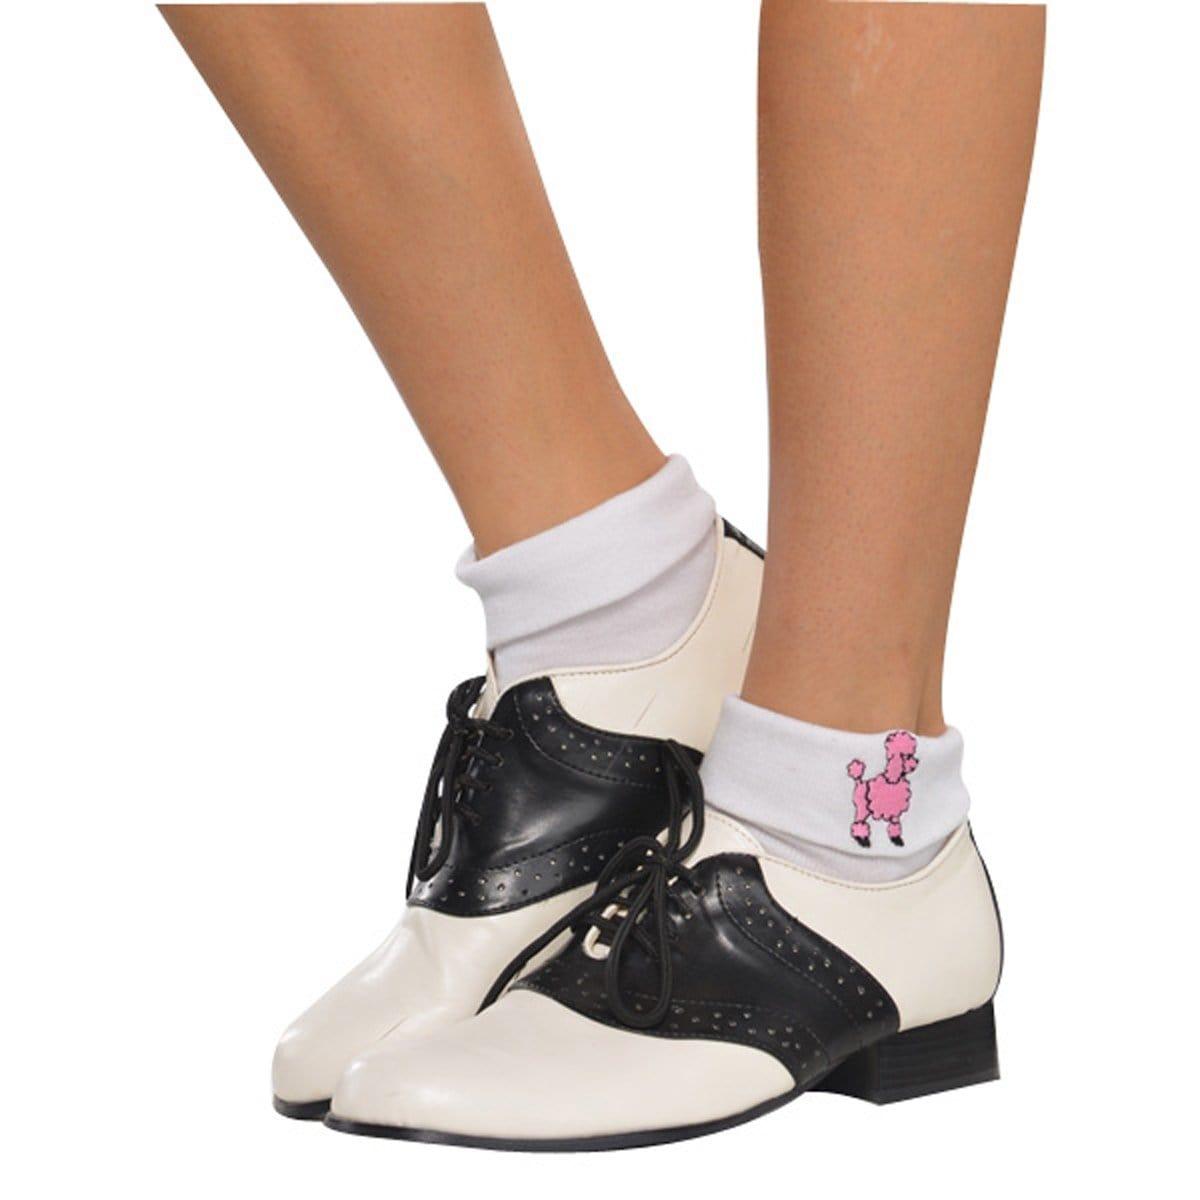 http://www.party-expert.com/cdn/shop/products/suit-yourself-costume-co-costume-accessories-sock-hop-socks-for-women-809801739801-13074905366594.jpg?v=1655545511&width=1200